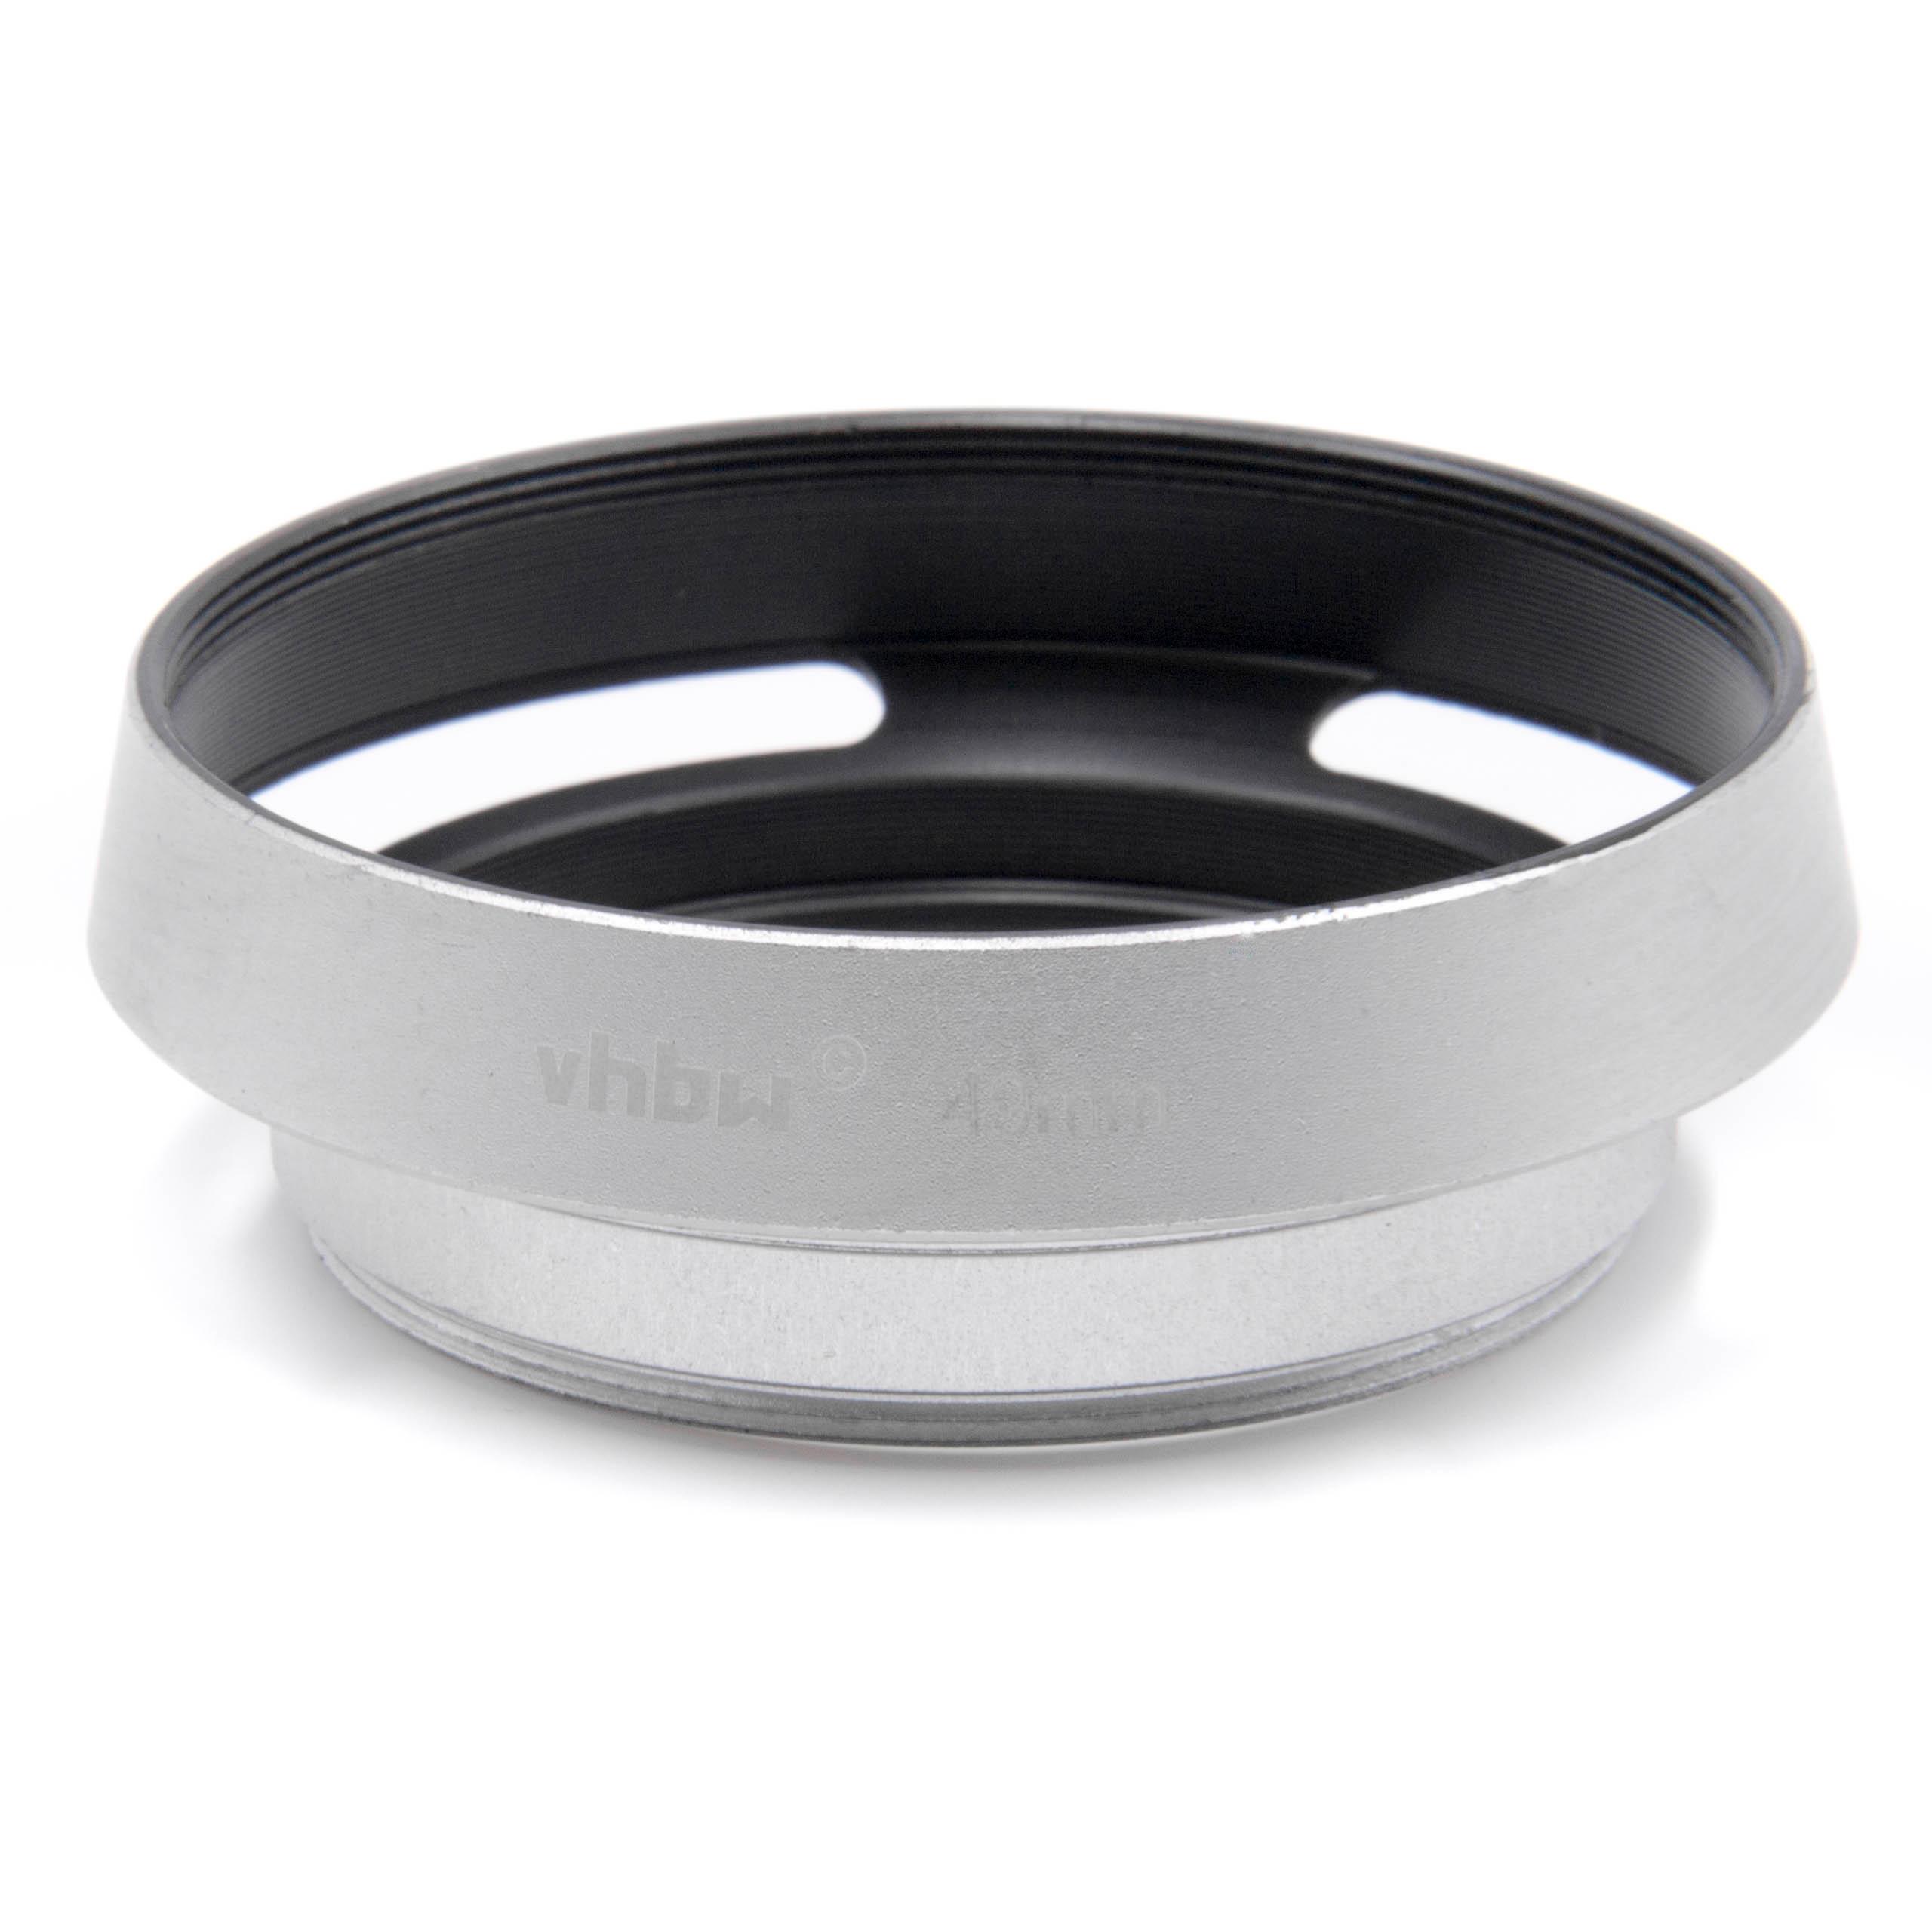 Lens Hood suitable for 49mm Lens - Lens Shade Silver, Round